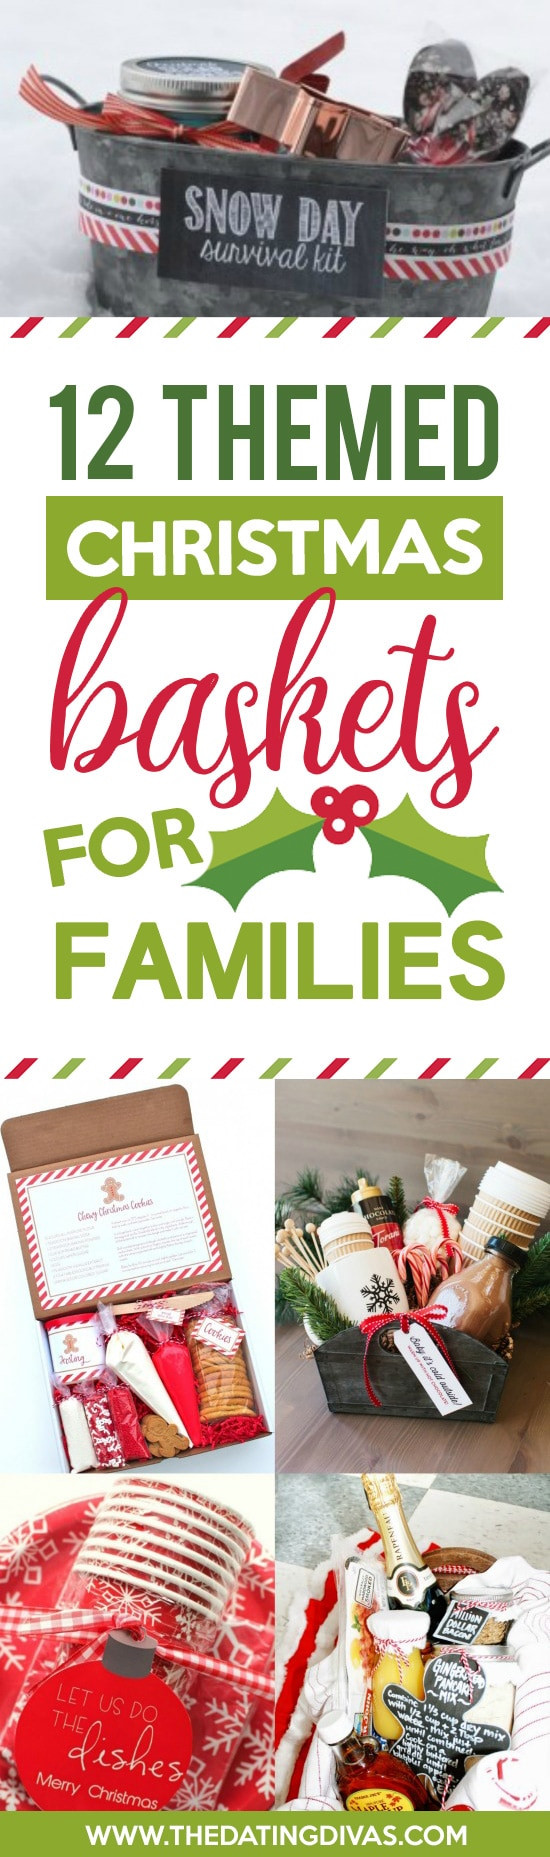 Gift Baskets Ideas For Families
 50 Themed Christmas Basket Ideas The Dating Divas